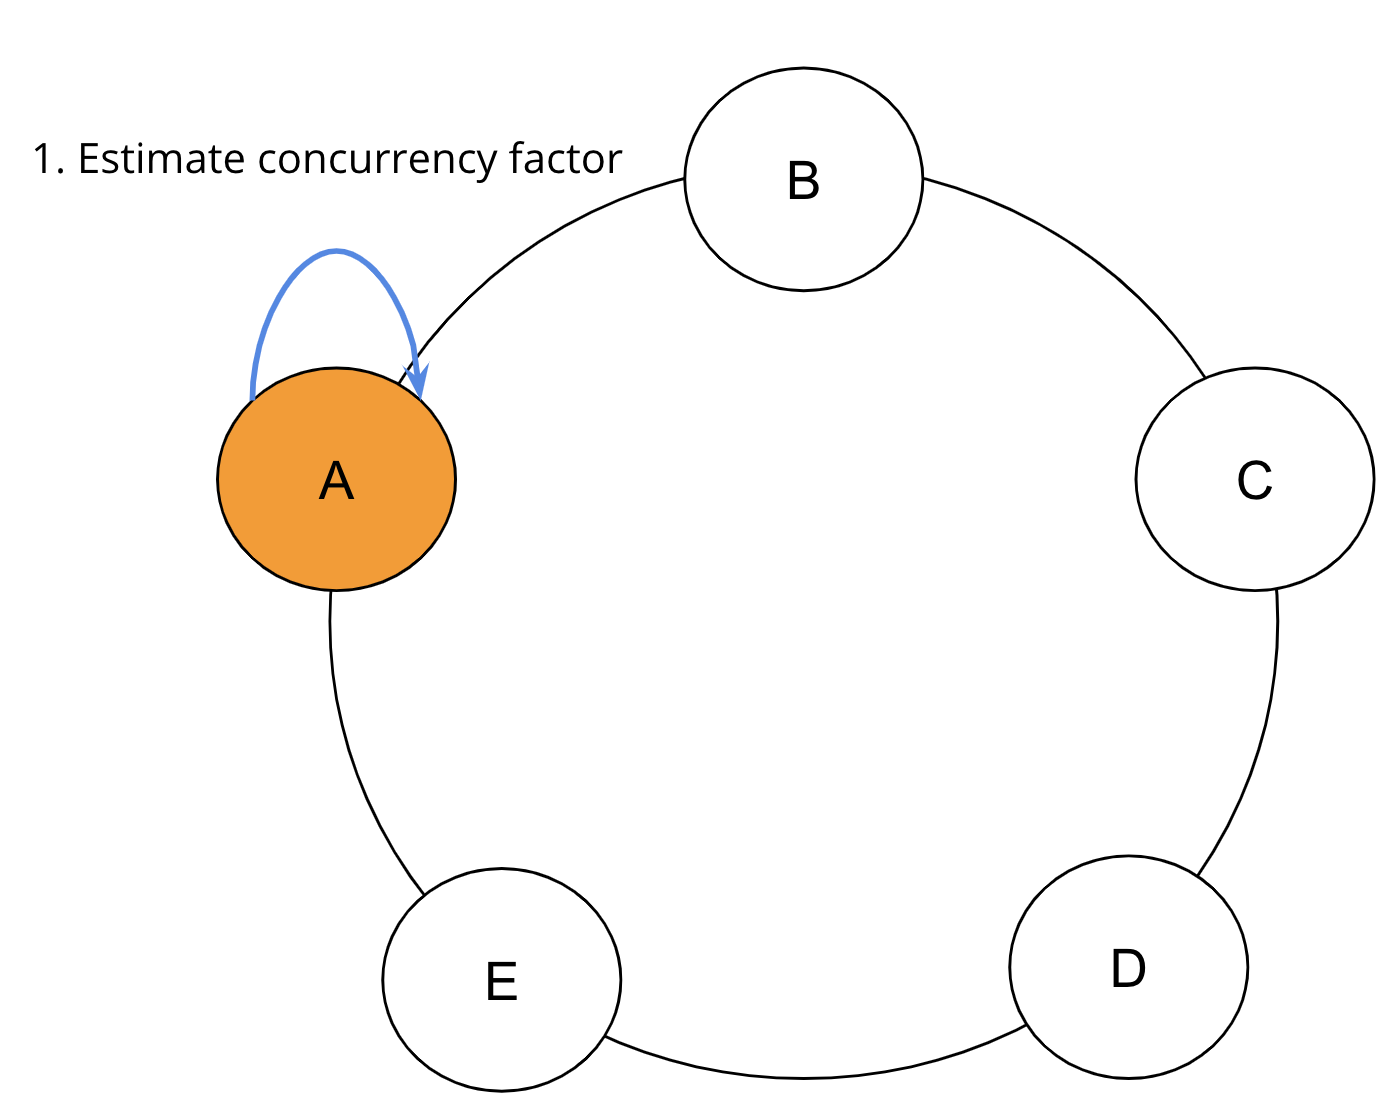 SAI step to estimate a concurrency factor as described in surrounding text